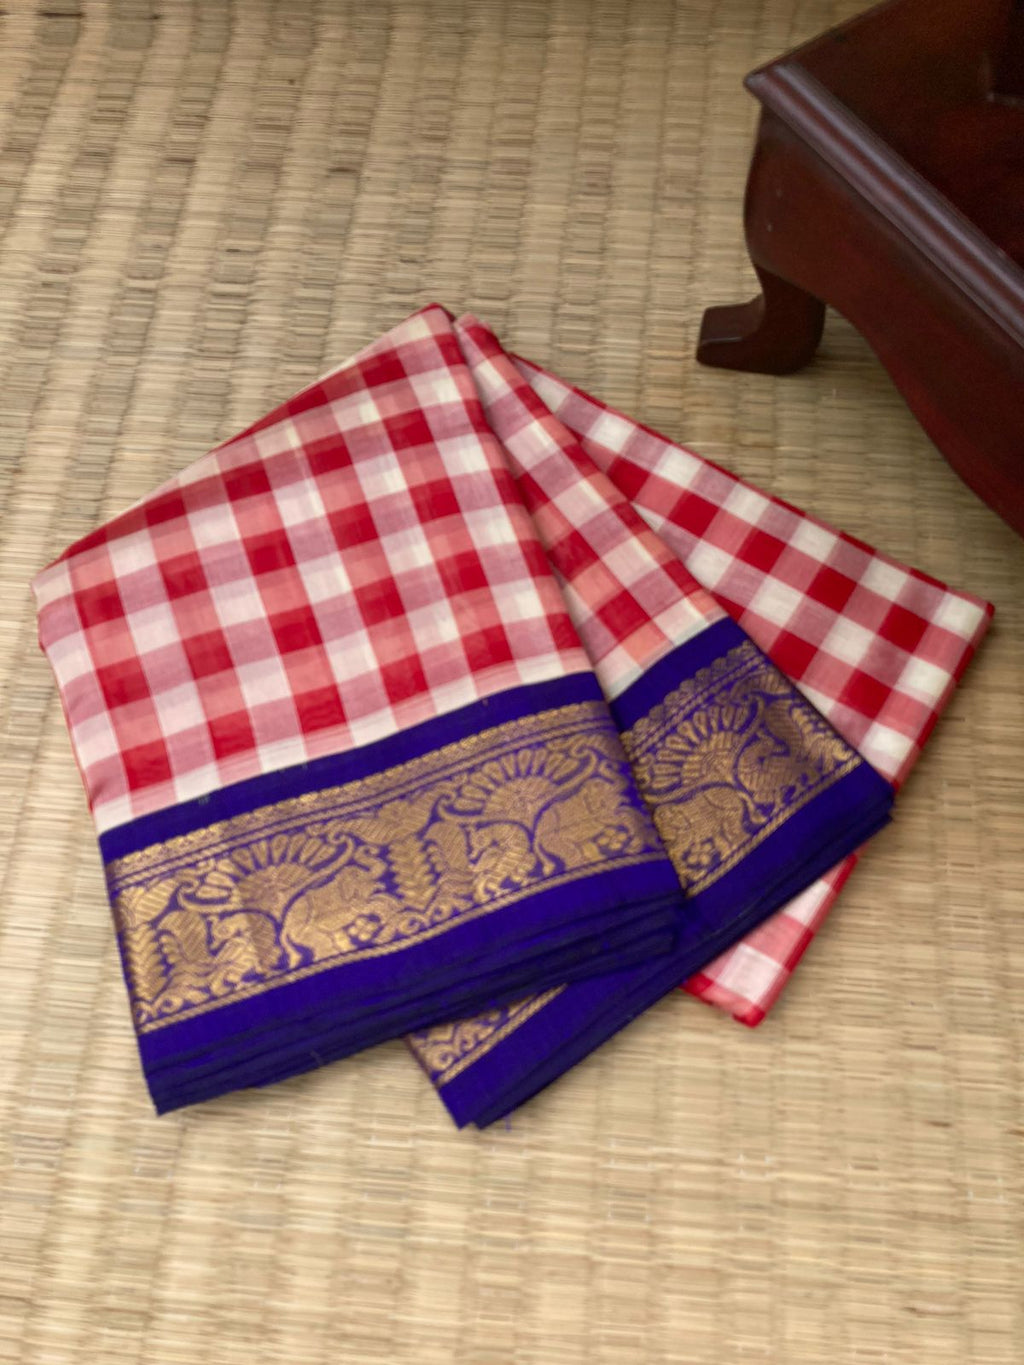 Paalum Palamum Kattams Korvai Silk Cottons - off white and deep red with deep ink blue